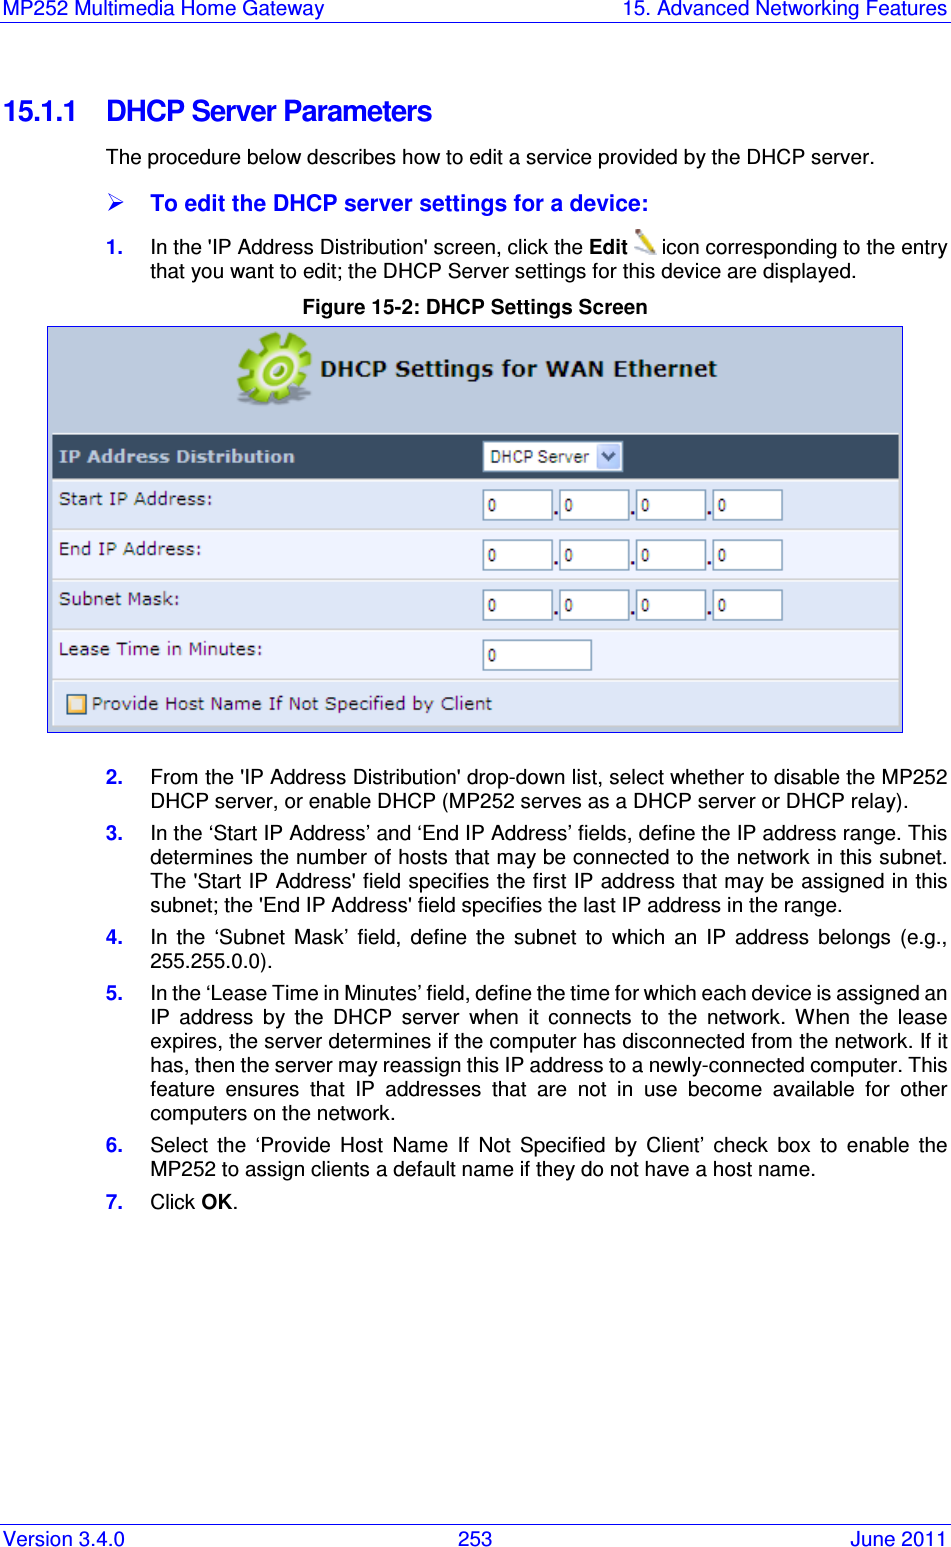 MP252 Multimedia Home Gateway  15. Advanced Networking Features Version 3.4.0  253  June 2011 15.1.1  DHCP Server Parameters The procedure below describes how to edit a service provided by the DHCP server.  To edit the DHCP server settings for a device: 1.  In the &apos;IP Address Distribution&apos; screen, click the Edit  icon corresponding to the entry that you want to edit; the DHCP Server settings for this device are displayed.  Figure 15-2: DHCP Settings Screen  2.  From the &apos;IP Address Distribution&apos; drop-down list, select whether to disable the MP252 DHCP server, or enable DHCP (MP252 serves as a DHCP server or DHCP relay). 3.  In the ‘Start IP Address’ and ‘End IP Address’ fields, define the IP address range. This determines the number of hosts that may be connected to the network in this subnet. The &apos;Start IP Address&apos; field specifies the first IP address that may be assigned in this subnet; the &apos;End IP Address&apos; field specifies the last IP address in the range. 4.  In  the  ‘Subnet  Mask’  field,  define  the  subnet  to  which  an  IP  address  belongs  (e.g., 255.255.0.0). 5.  In the ‘Lease Time in Minutes’ field, define the time for which each device is assigned an IP  address  by  the  DHCP  server  when  it  connects  to  the  network.  When  the  lease expires, the server determines if the computer has disconnected from the network. If it has, then the server may reassign this IP address to a newly-connected computer. This feature  ensures  that  IP  addresses  that  are  not  in  use  become  available  for  other computers on the network. 6.  Select  the  ‘Provide  Host  Name  If  Not  Specified  by  Client’  check  box  to  enable  the MP252 to assign clients a default name if they do not have a host name. 7.  Click OK.  